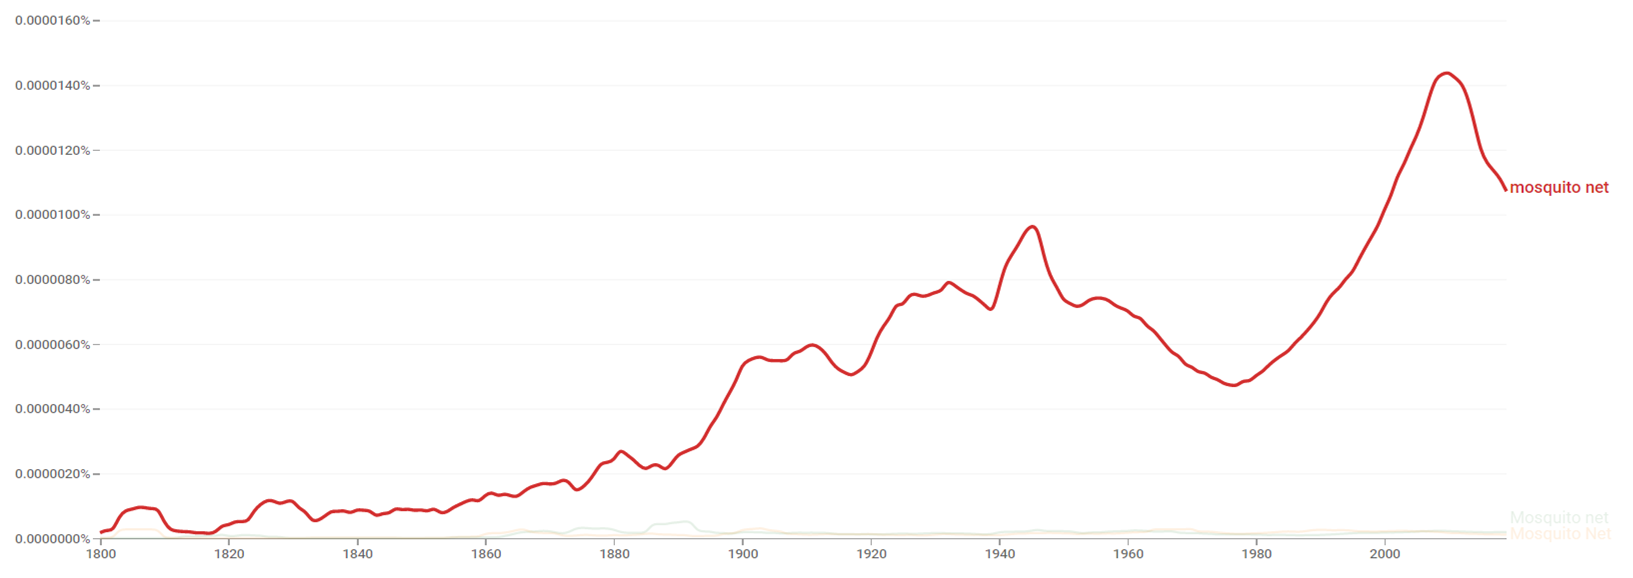 Mosquito net ngram.png